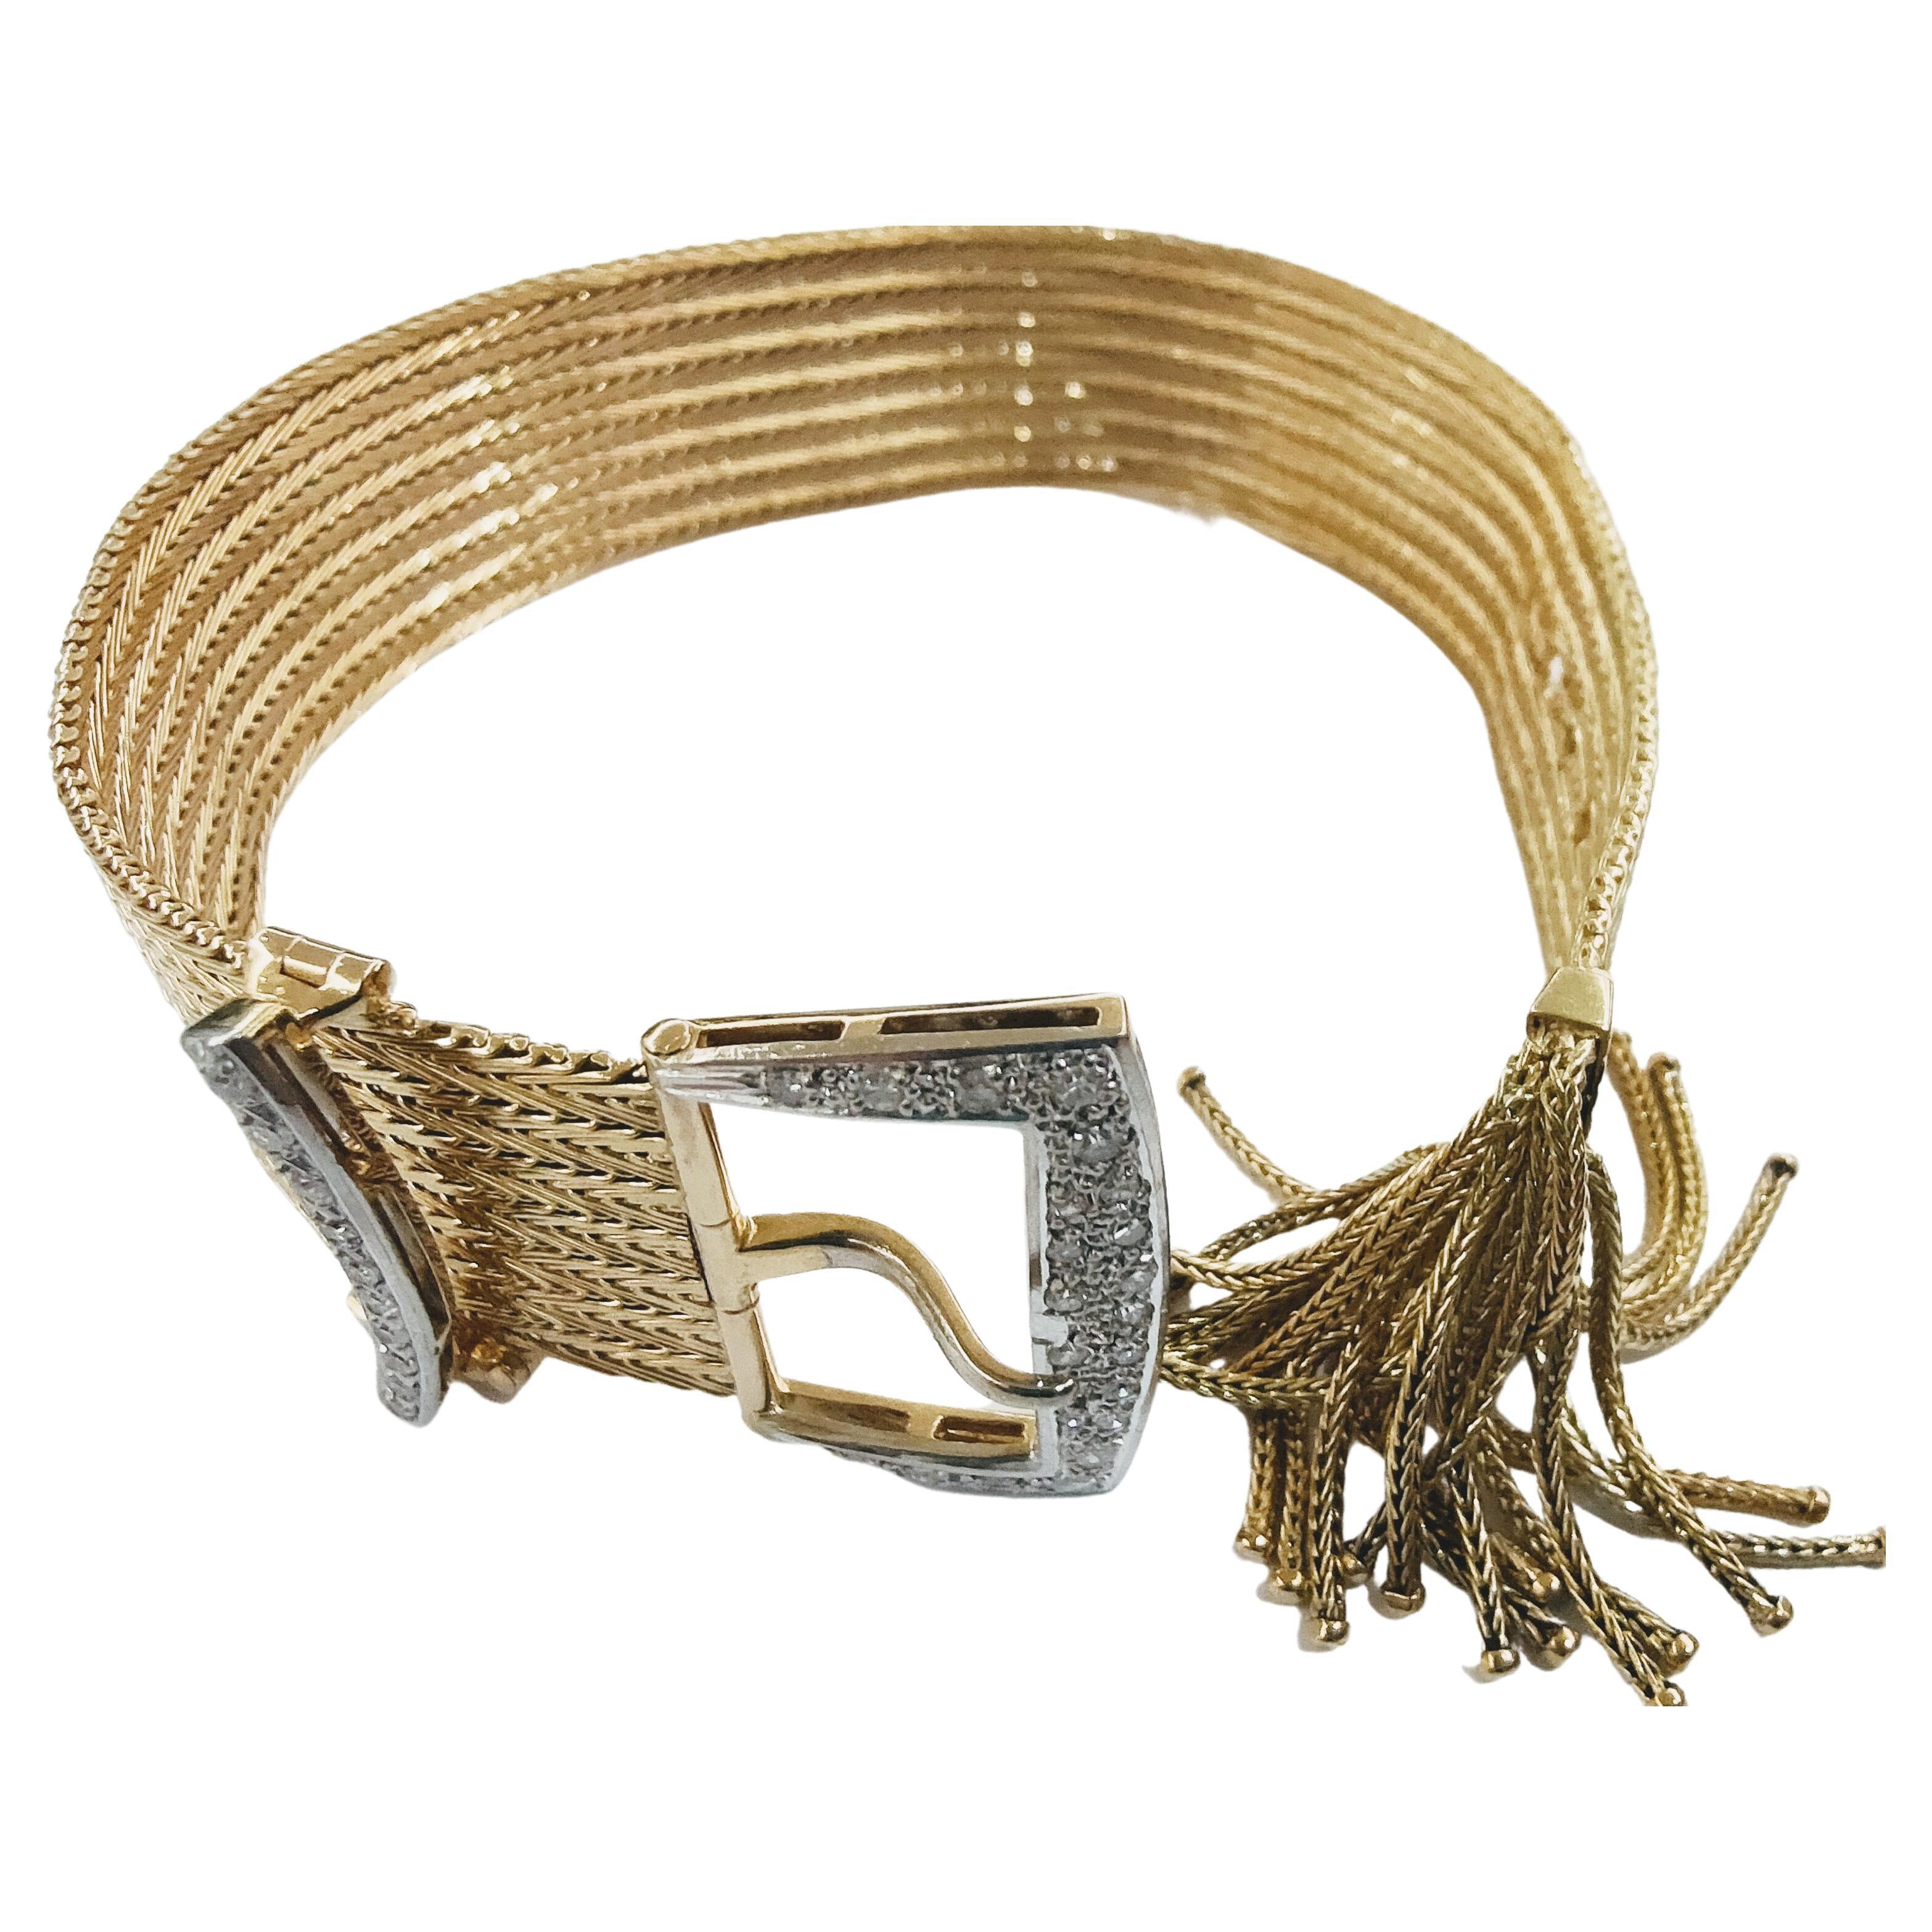 Wonderful and important Belt bracelet with Buckle and pin decorated with diamonds simple cut topped with fringes at the end made of yellow gold 18 kts and Platinum with a weight of 64.70 grams. As for the length, its flexibility and preparation